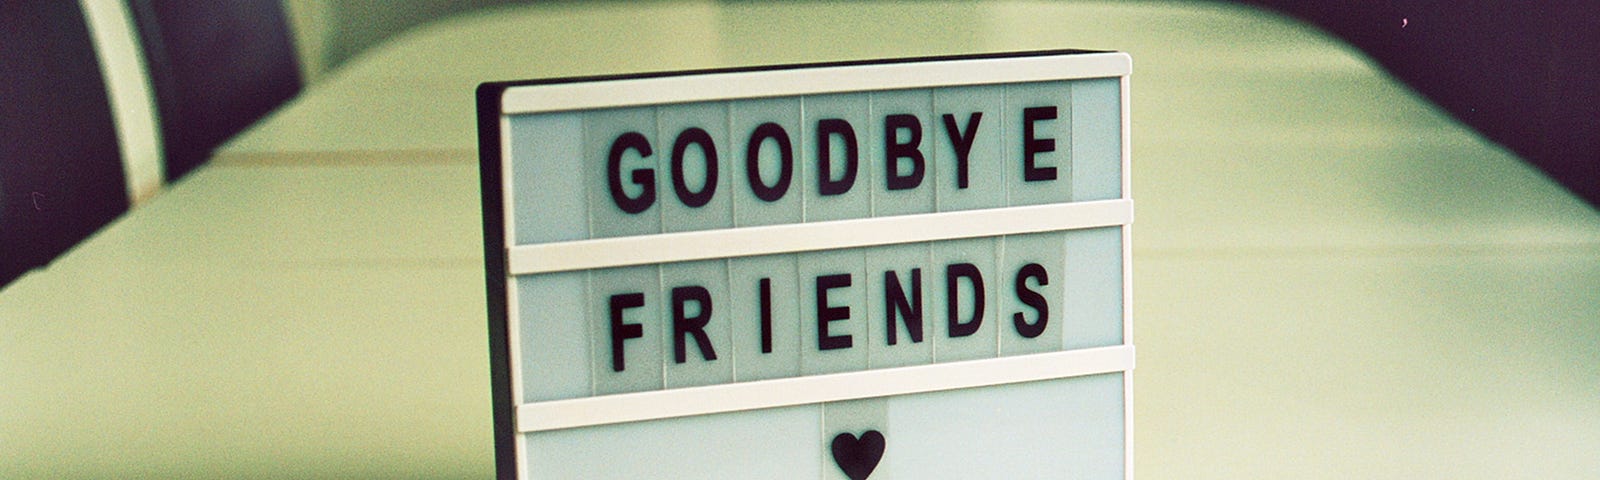 Desktop marquee sign with the words “Goodbye Friends”